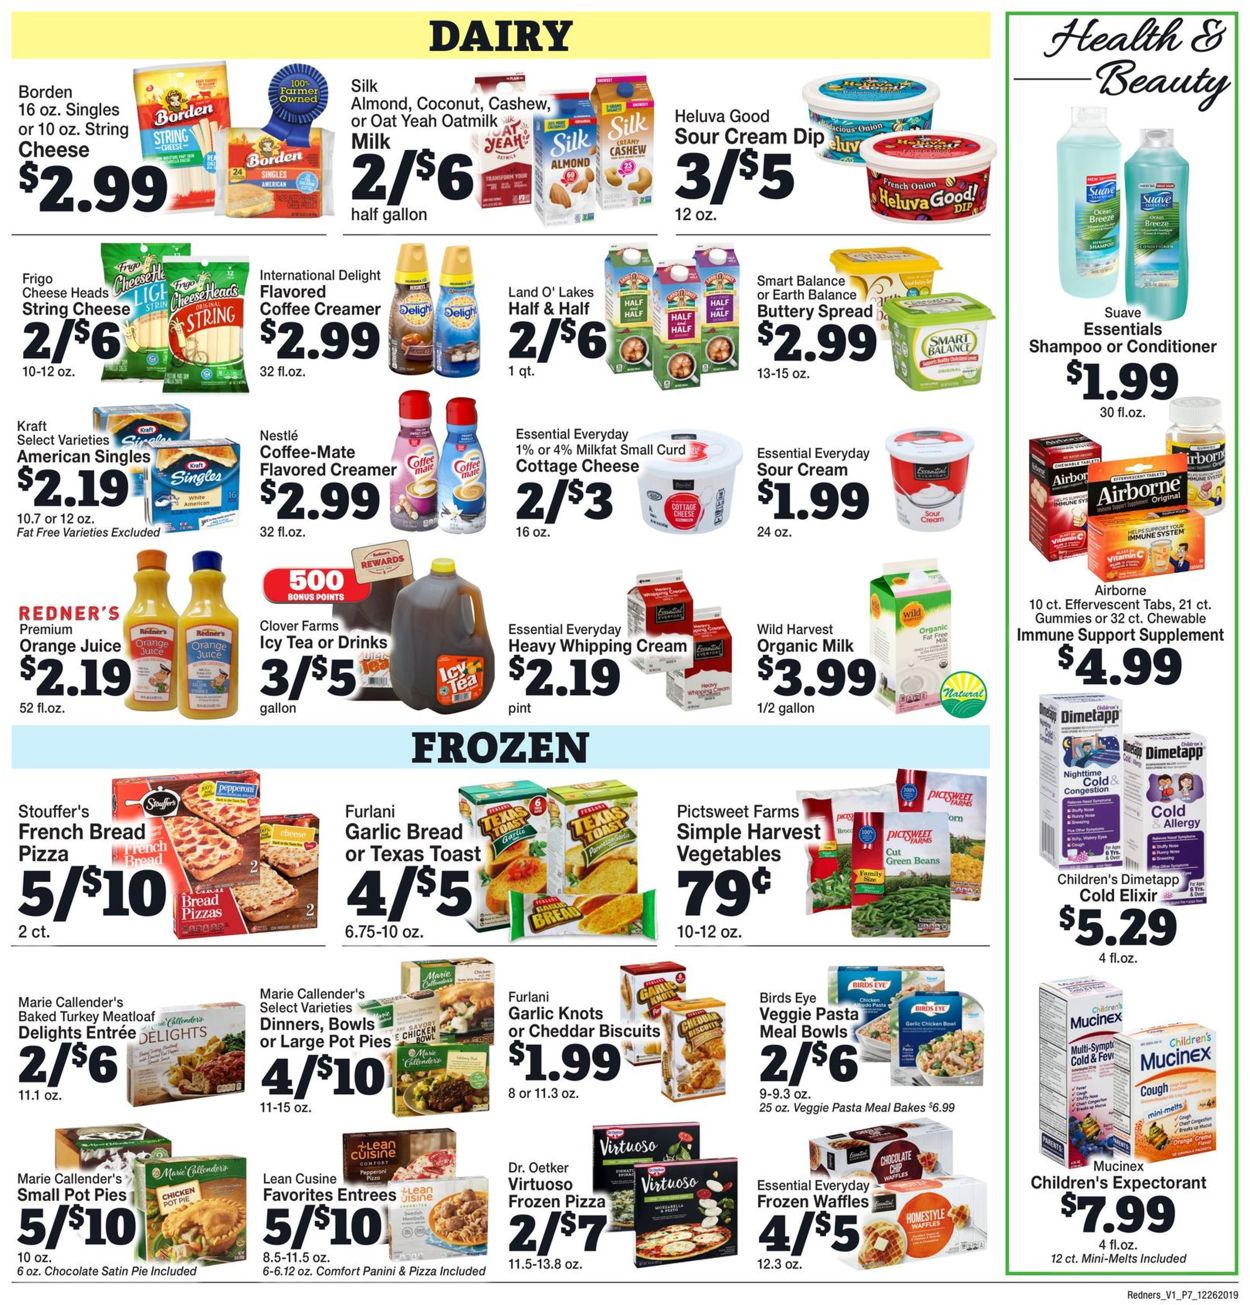 Redner’s Warehouse Market - New Year's Ad 2019/2020 Weekly Ad Circular - valid 12/26-01/01/2020 (Page 9)